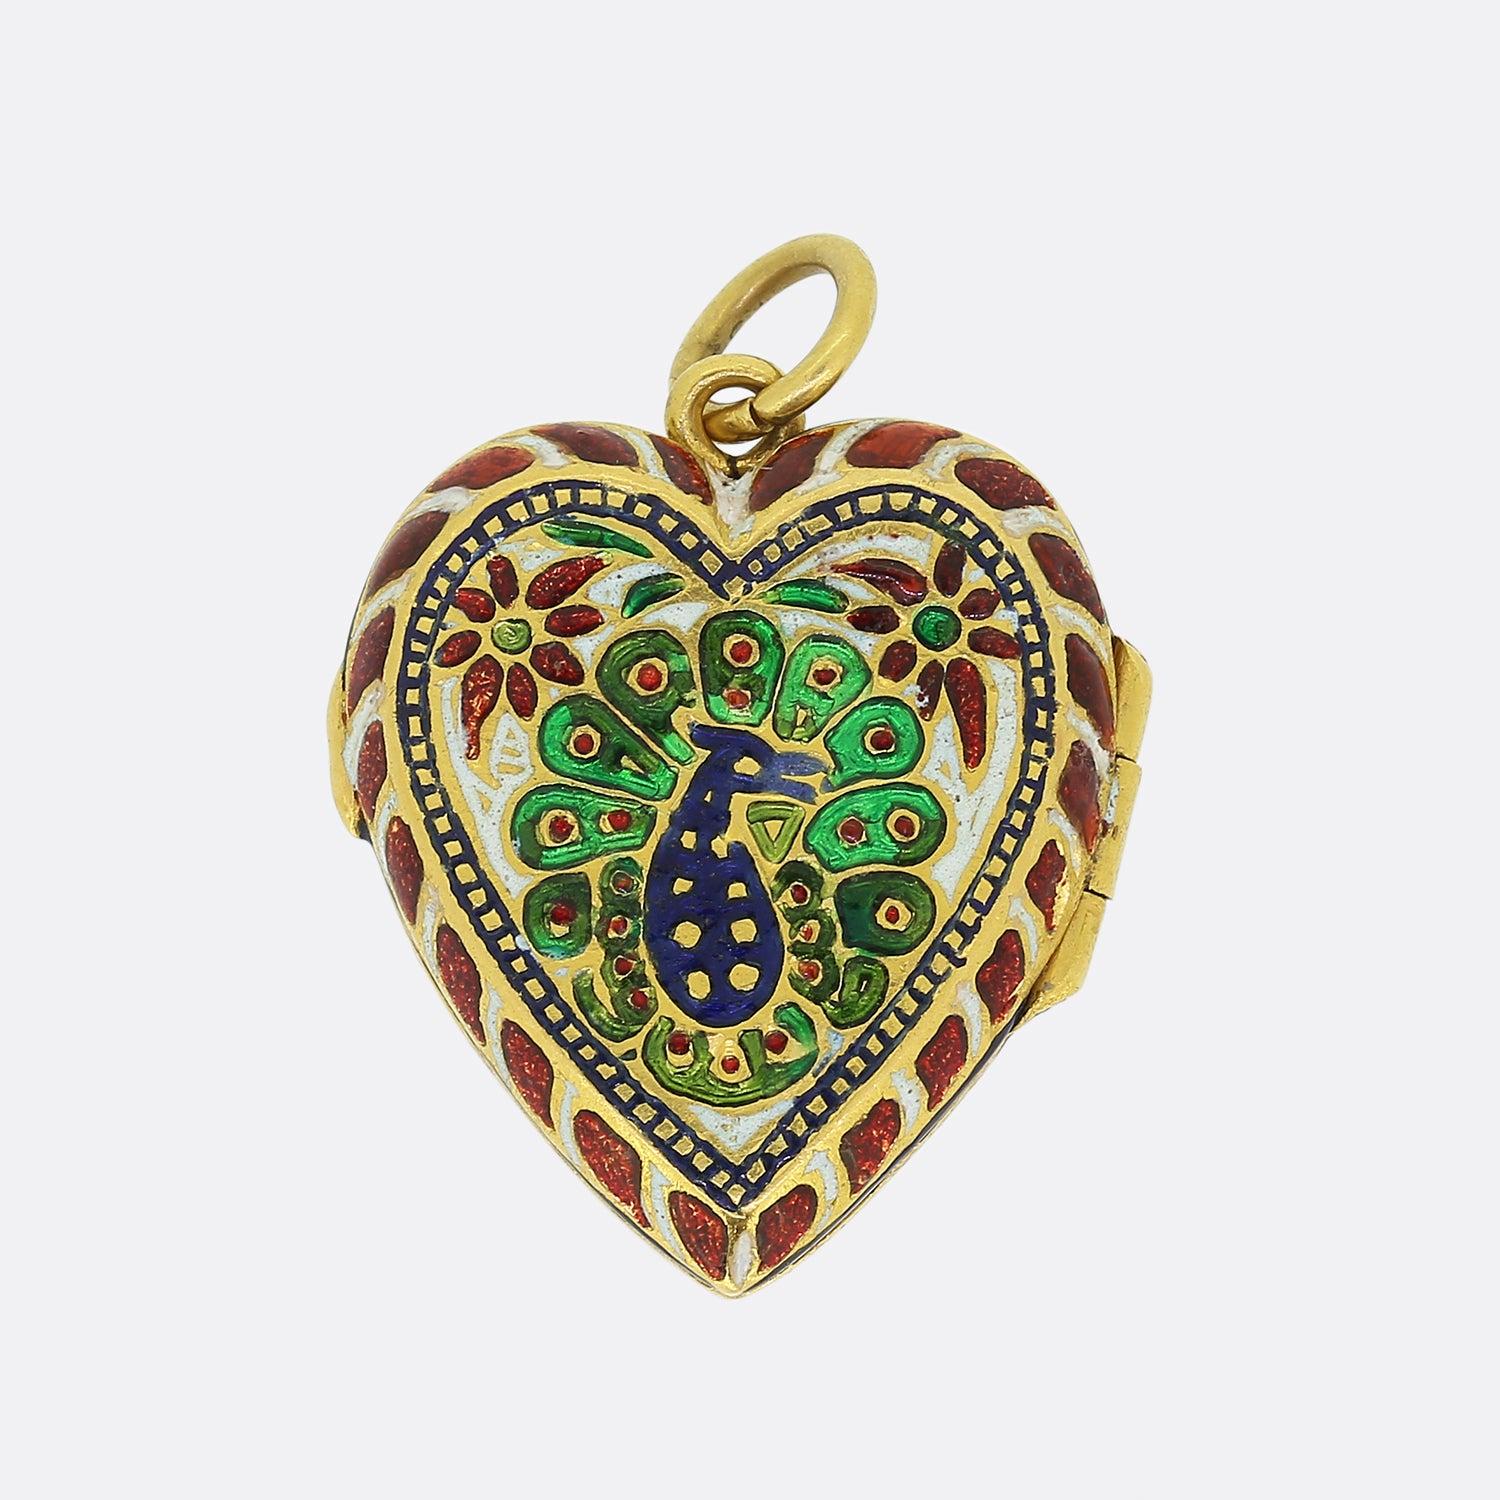 Here we have an outstanding heart shaped locket produced during the Mughal era. Mughal jewellery is notorious for exotic designs with birds, flowers and paisley being the most common themes used at the time and this piece is a perfect example of